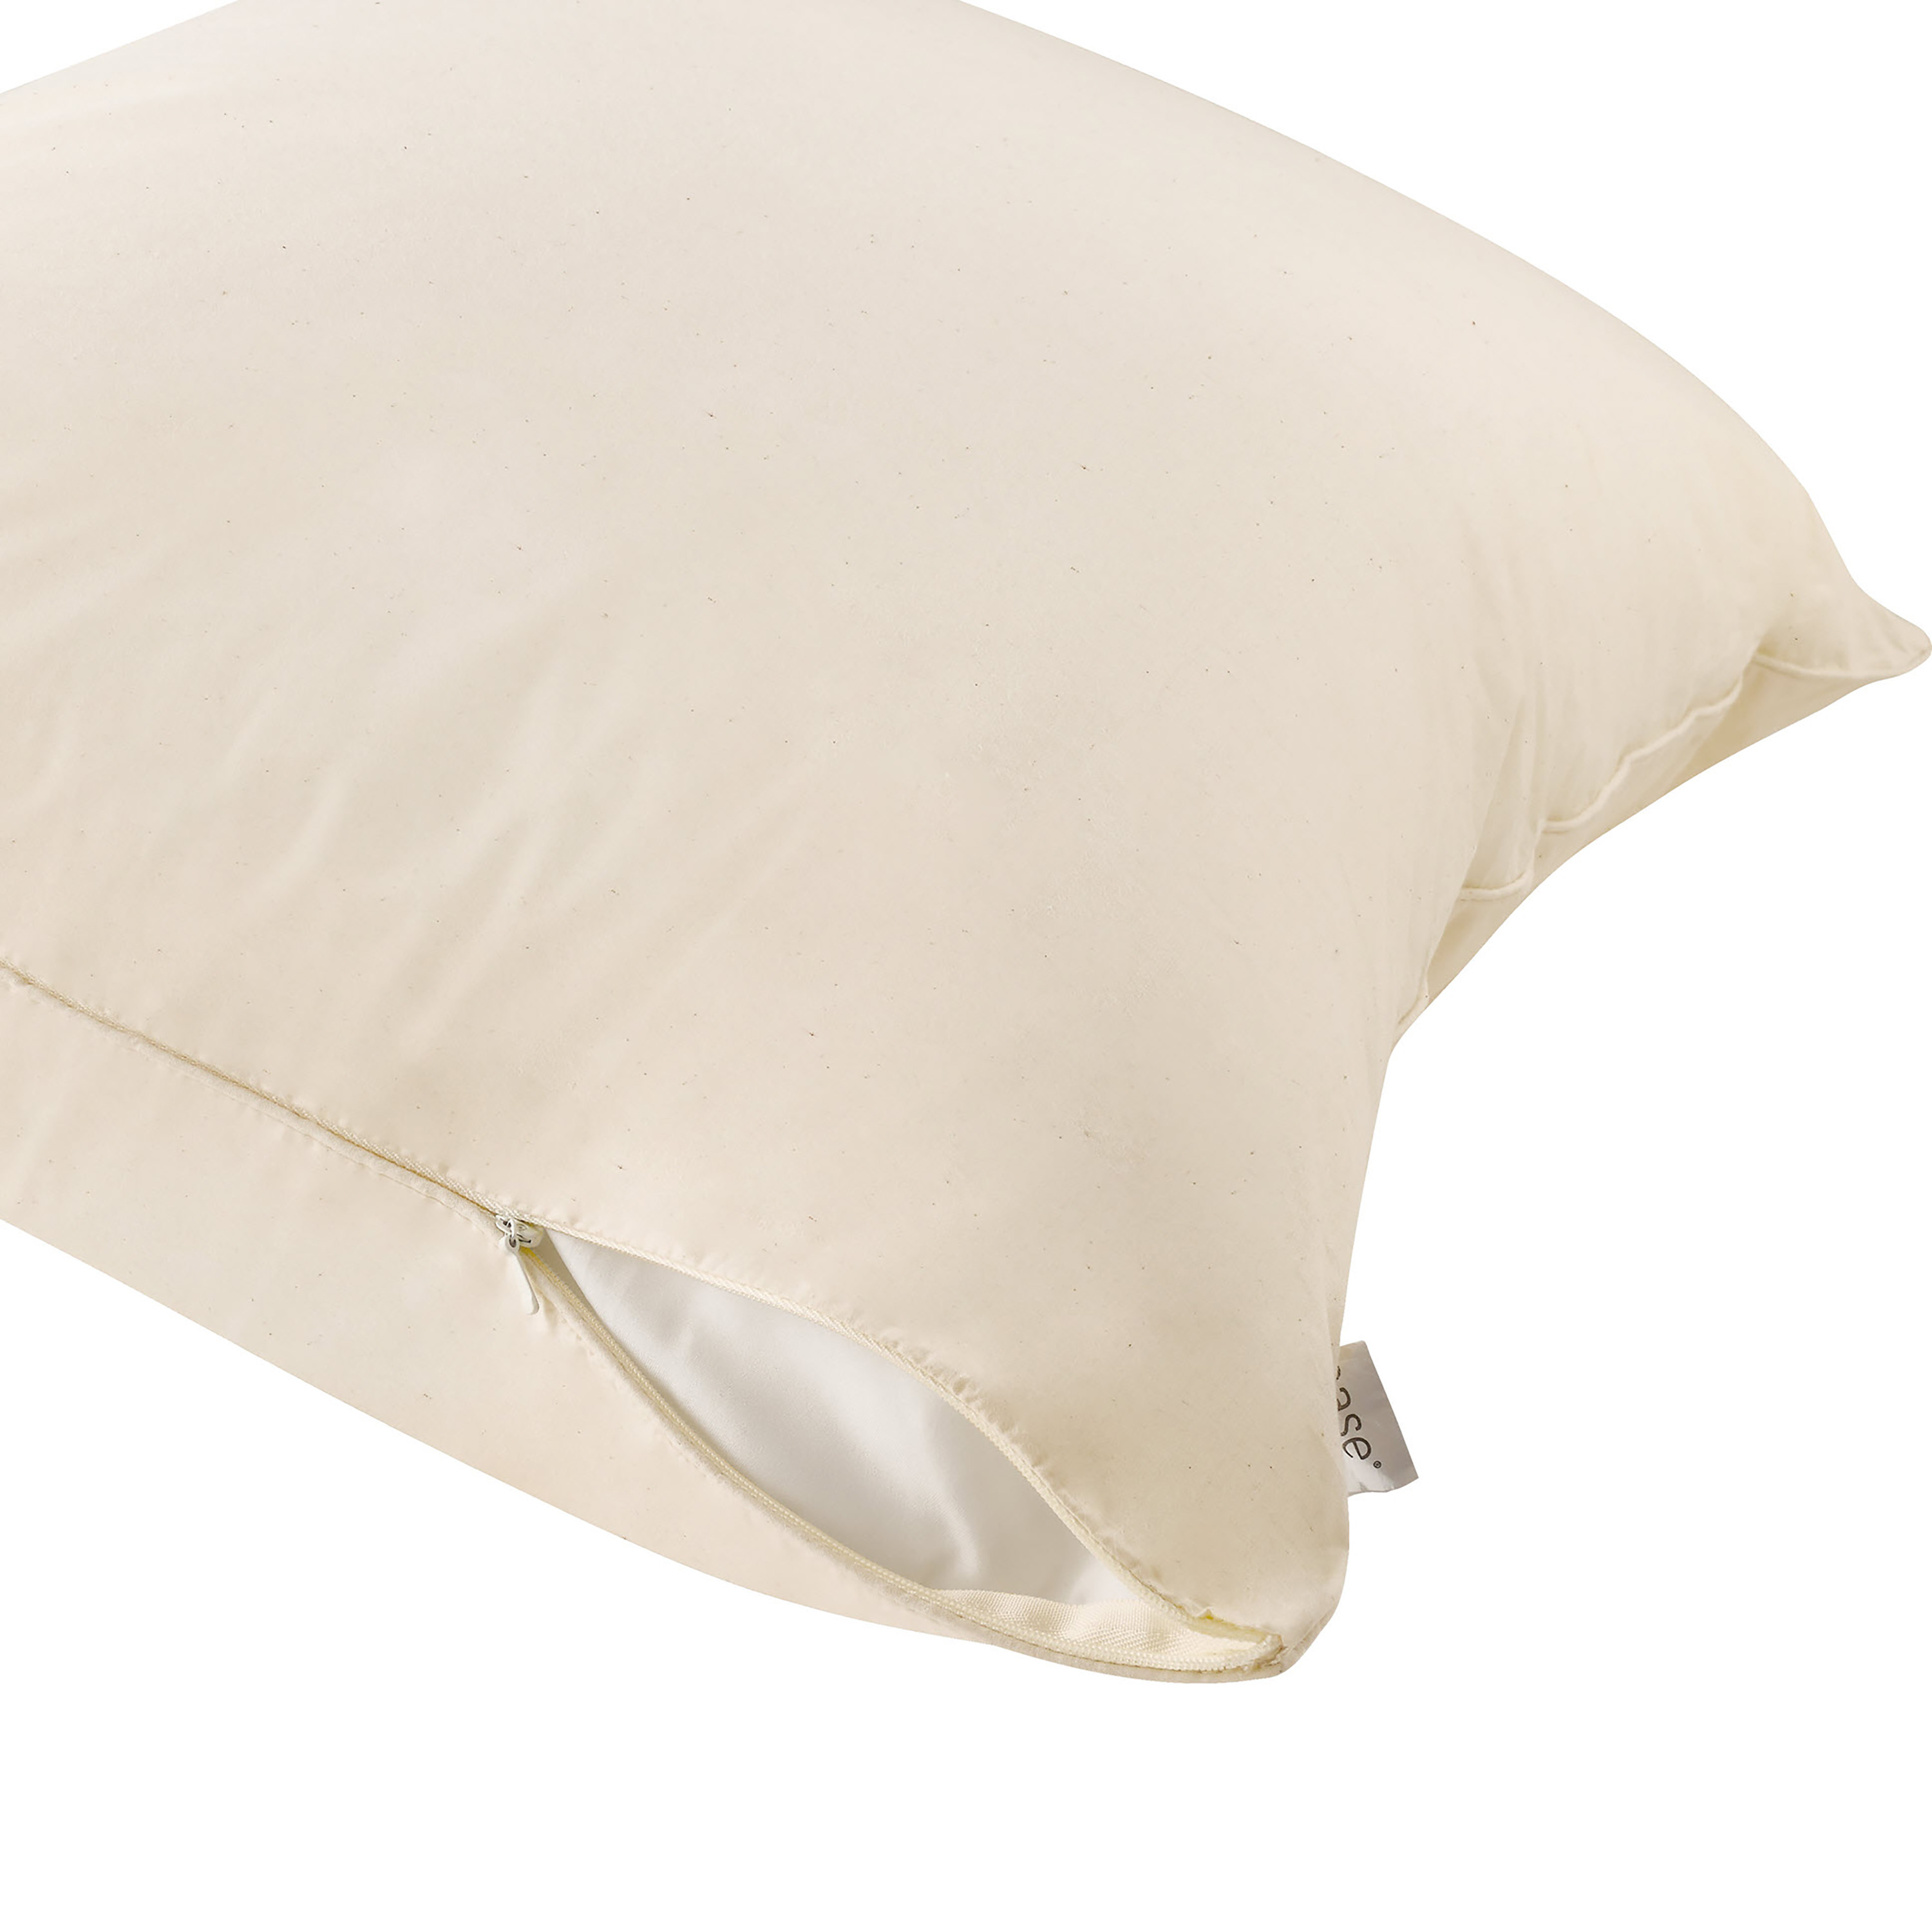 Allerease Organic Cotton Zippered Pillow Protector, Standard/Queen - image 4 of 7